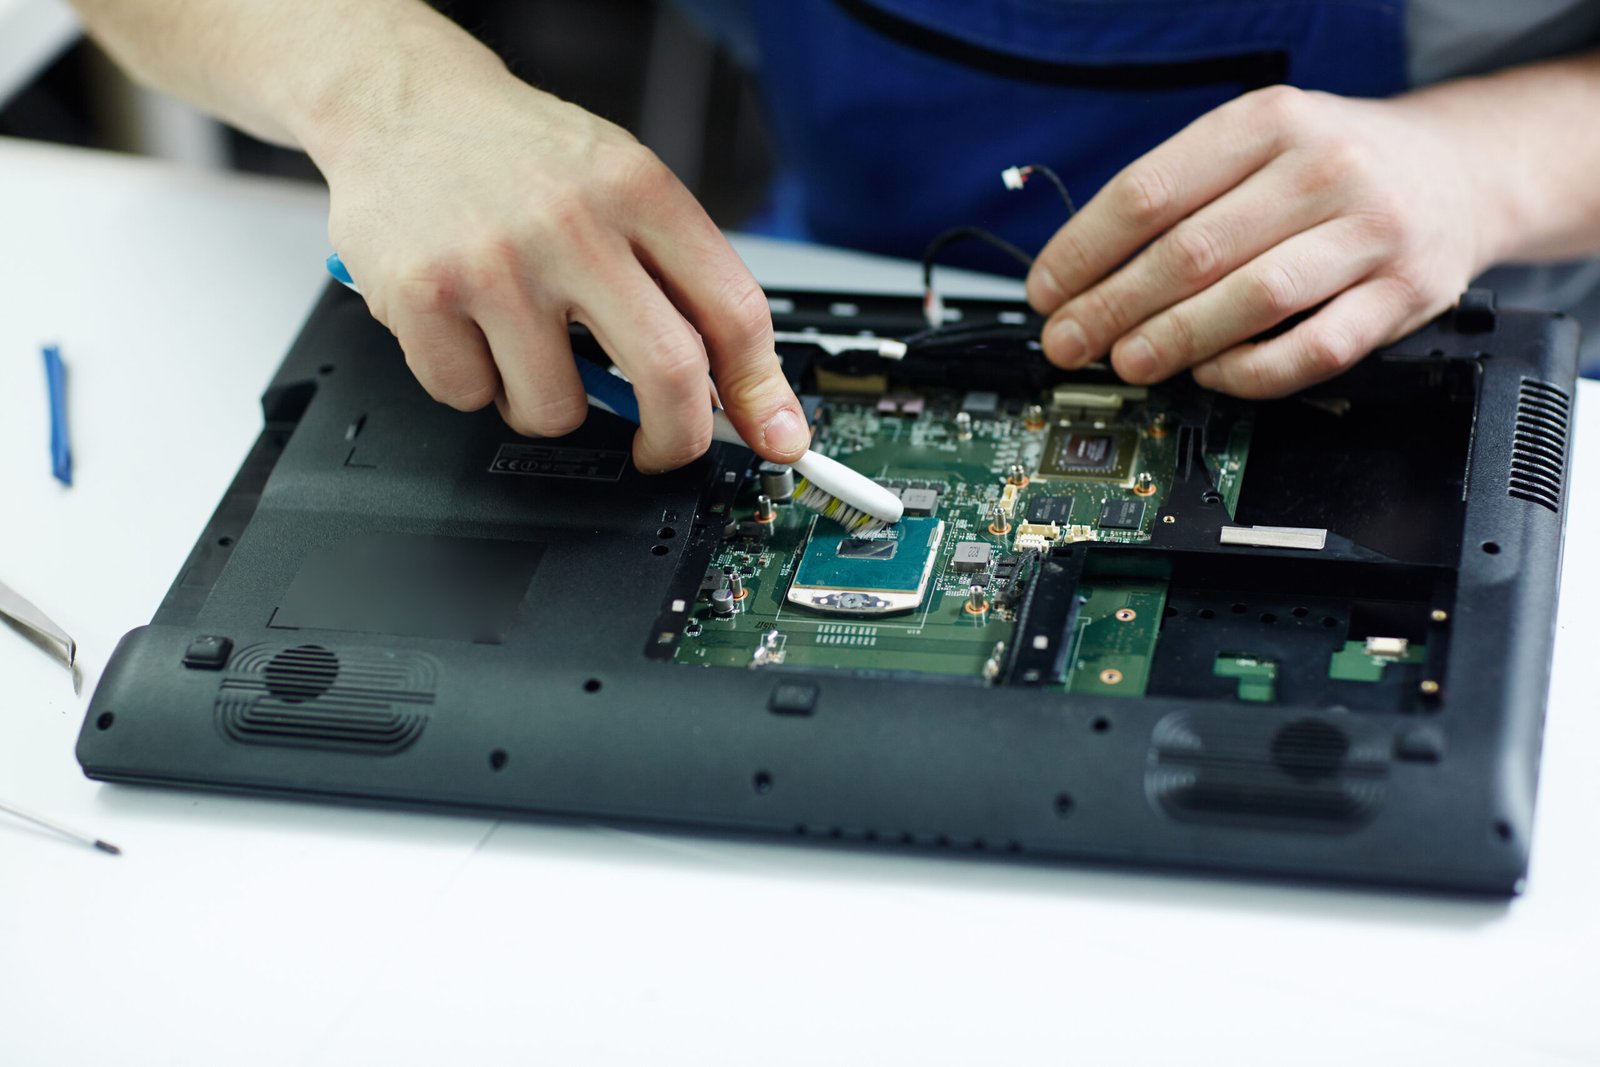 Technician Clearing Circuit Board of Disassembled Laptop